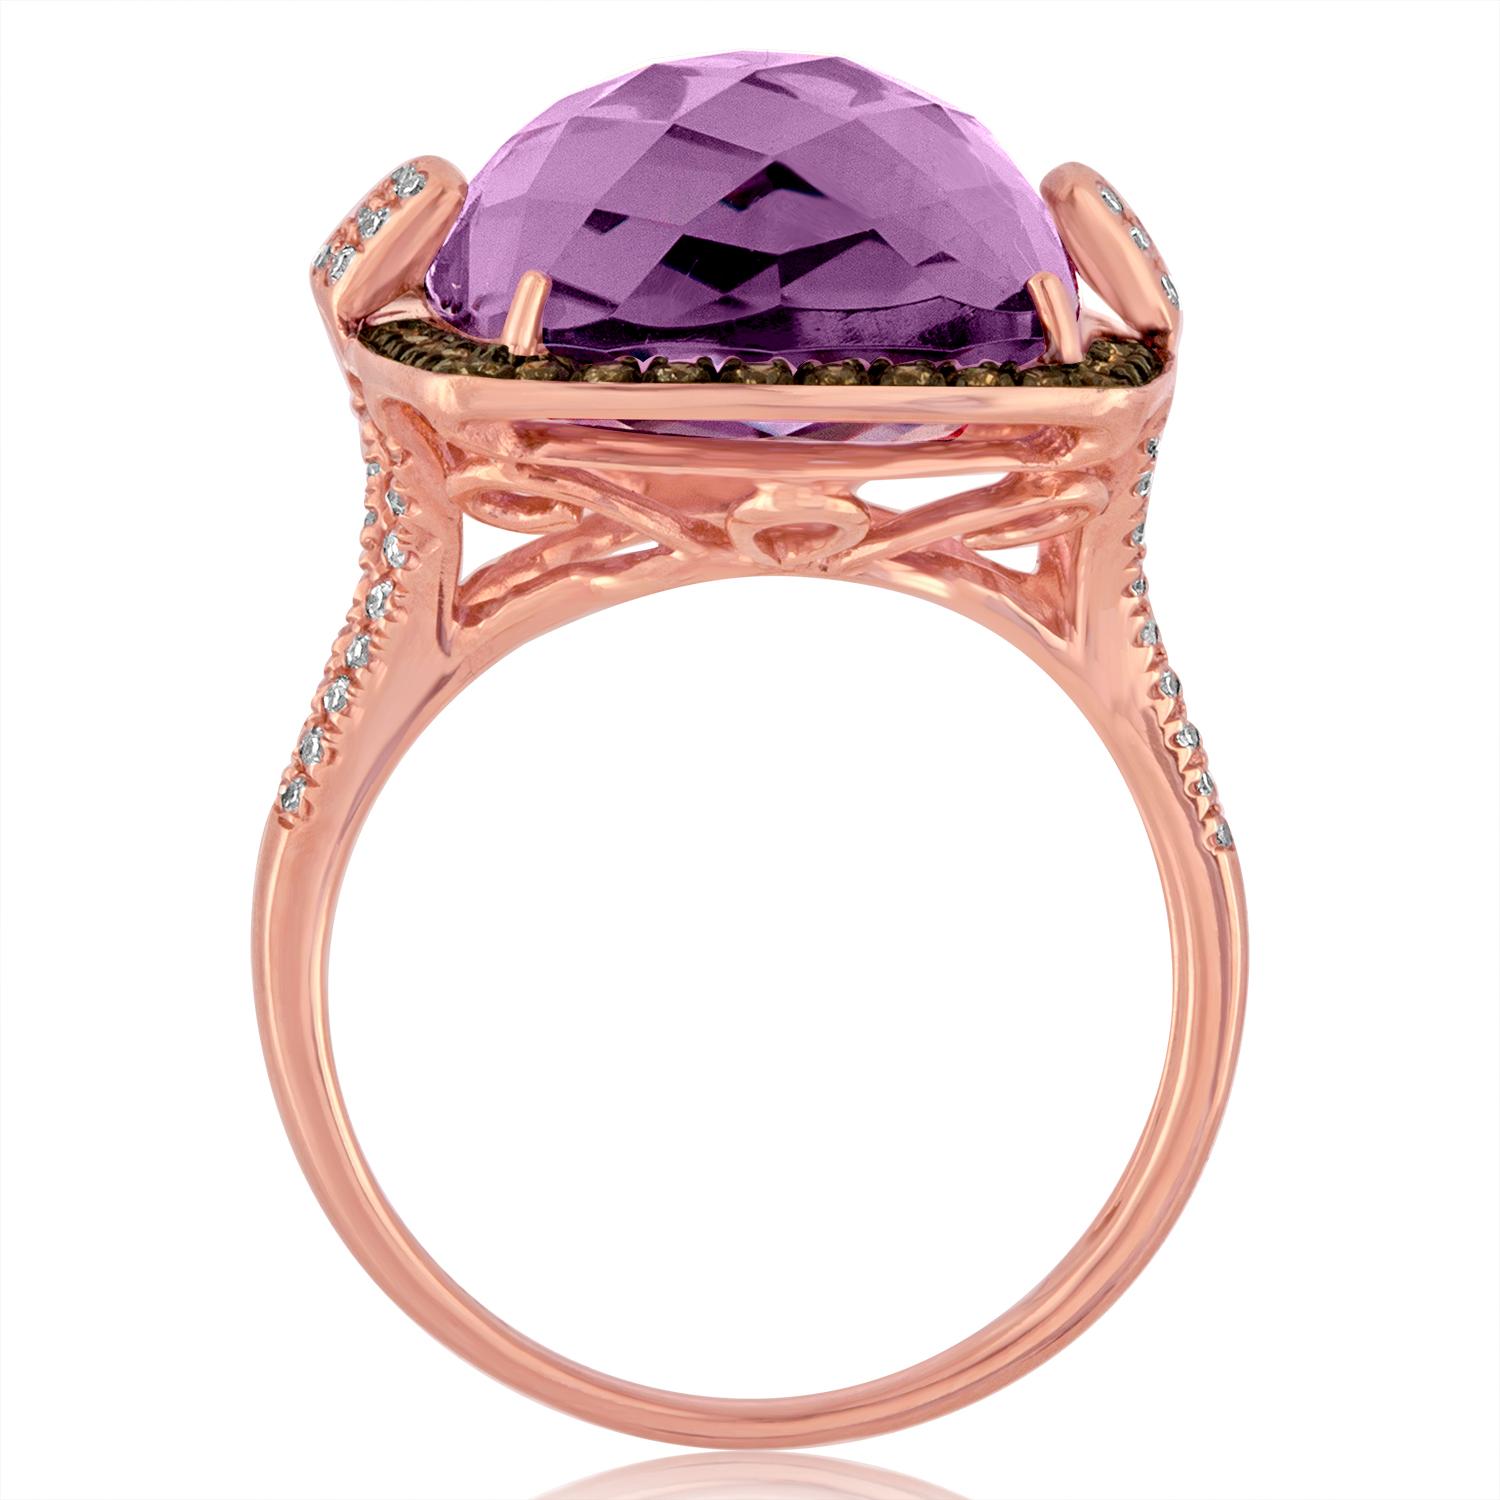 Fun Fun Fun Ring
The ring is 14K Rose Gold
There are 0.17 Ct In White Diamonds H VS
There are 0.29 Ct Champagne Diamonds
The Radiant Checkerboard Cut Amethyst is 13.93 Carats.
The ring is a size 6.75, sizable.
The ring weighs 6.8 grams